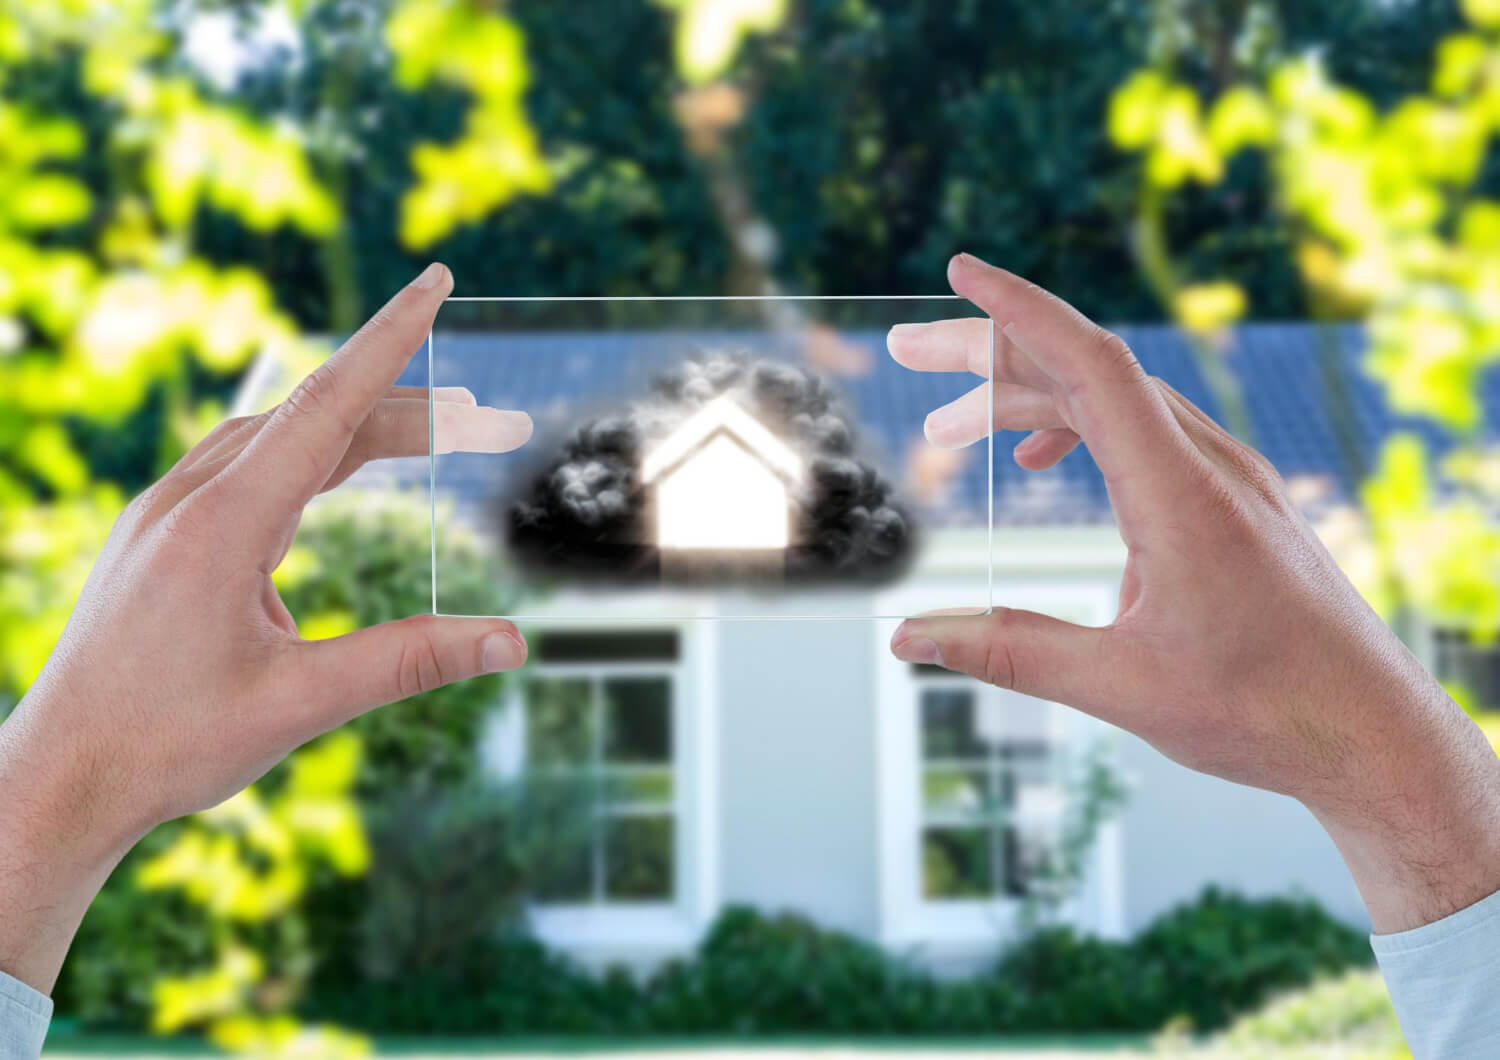 front view of a house with man's hands holding a cloud futuristic device with a house on it